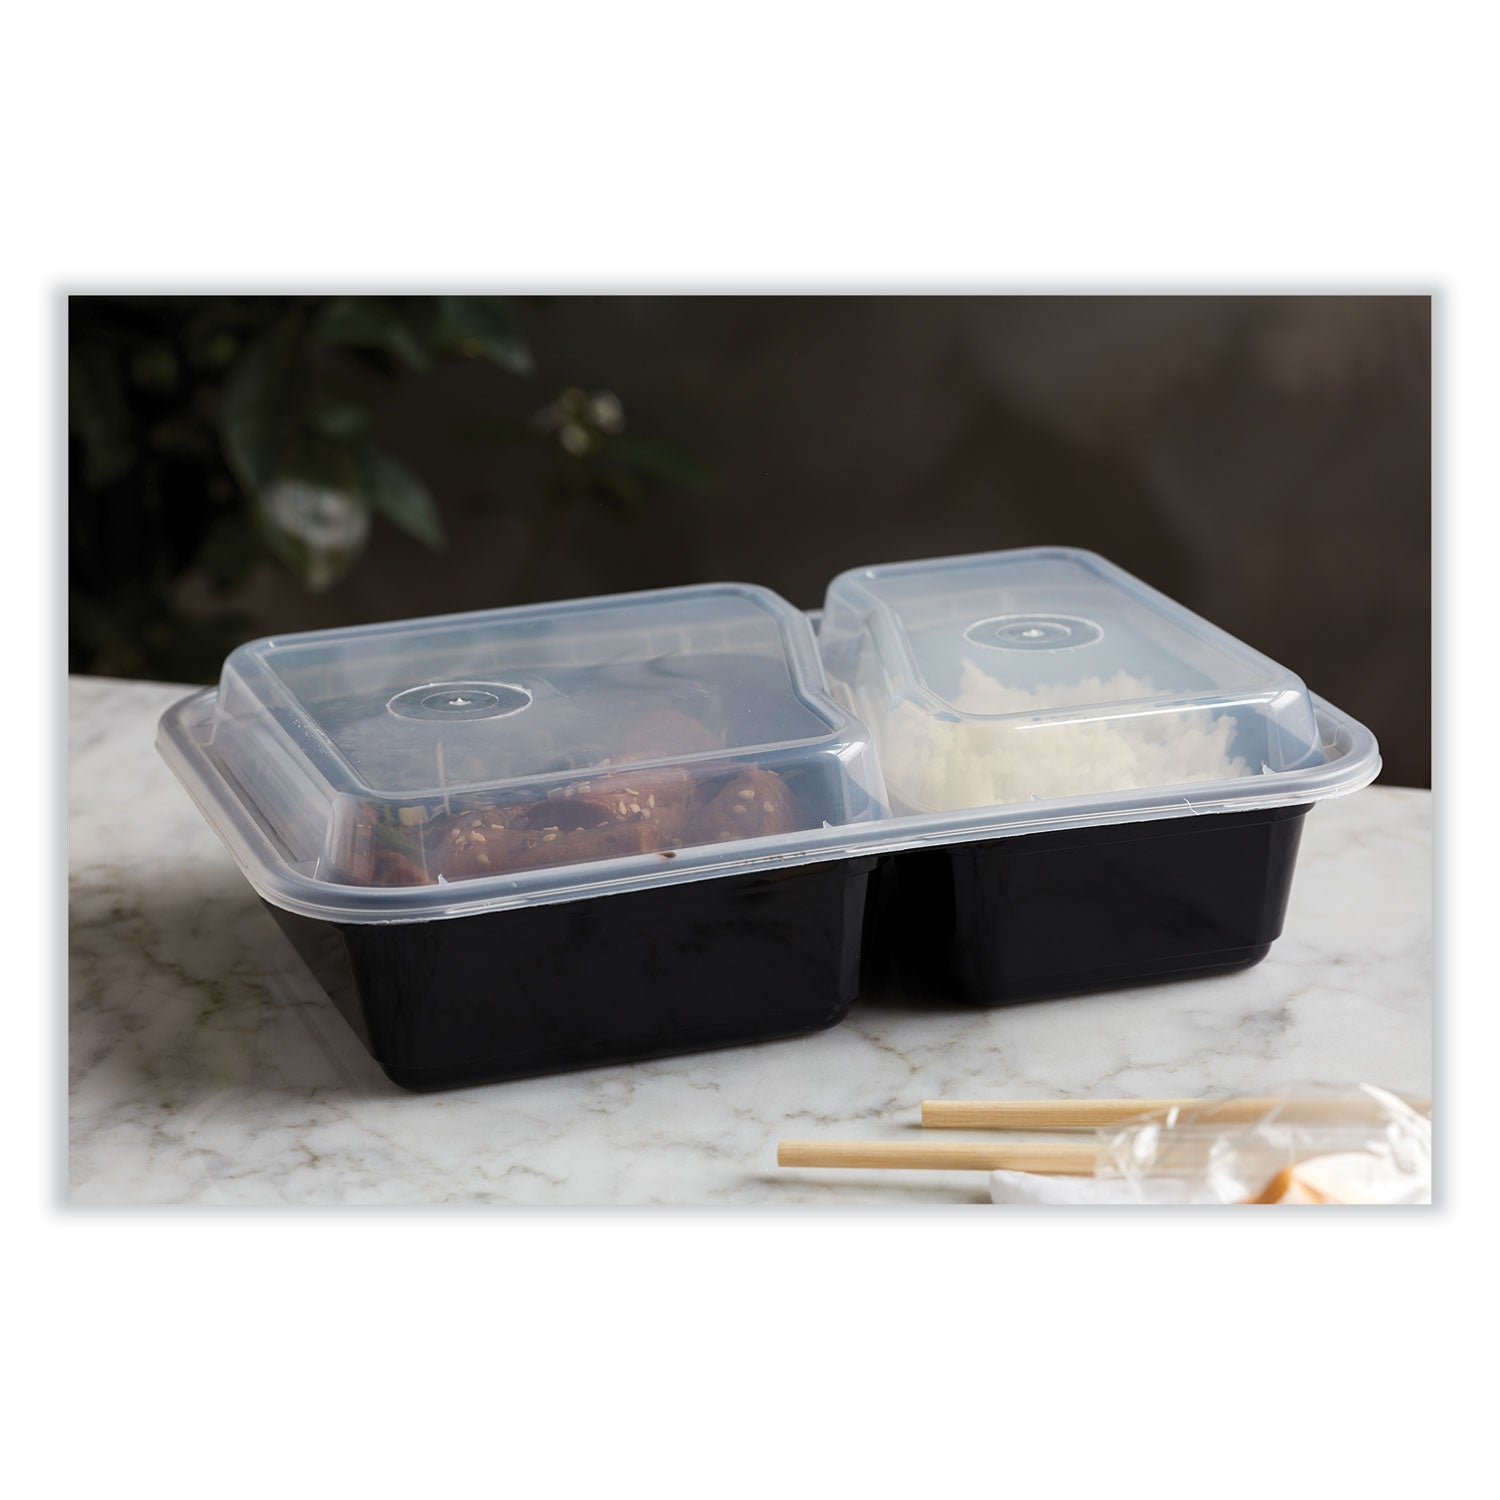 newspring-versatainer-microwavable-containers-rectangular-2-compartment-30-oz-6-x-85-x-25-black-clear-plastic-150-ct_pctnc8288b - 4